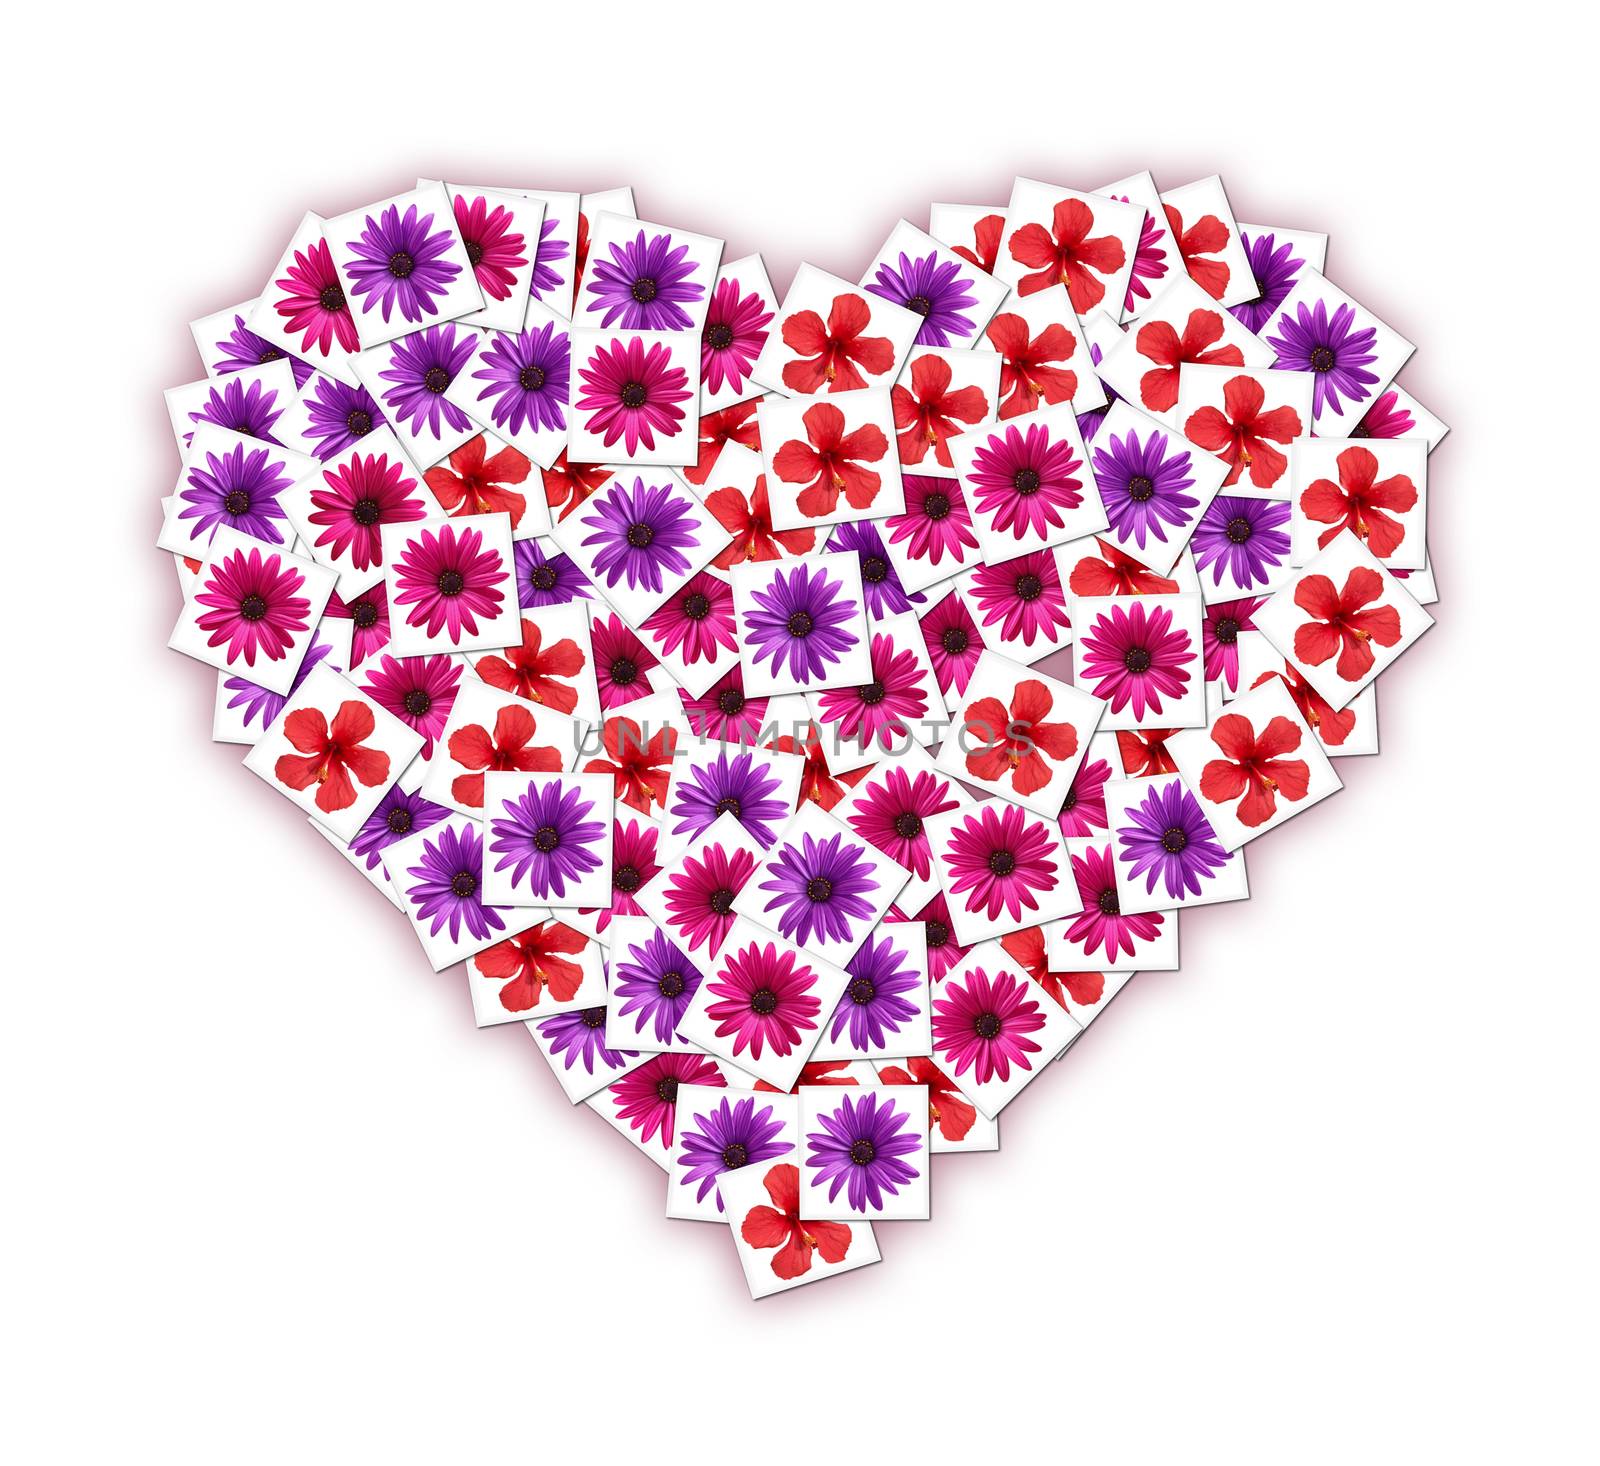 Collage of blossoming flowers in the shape of heart